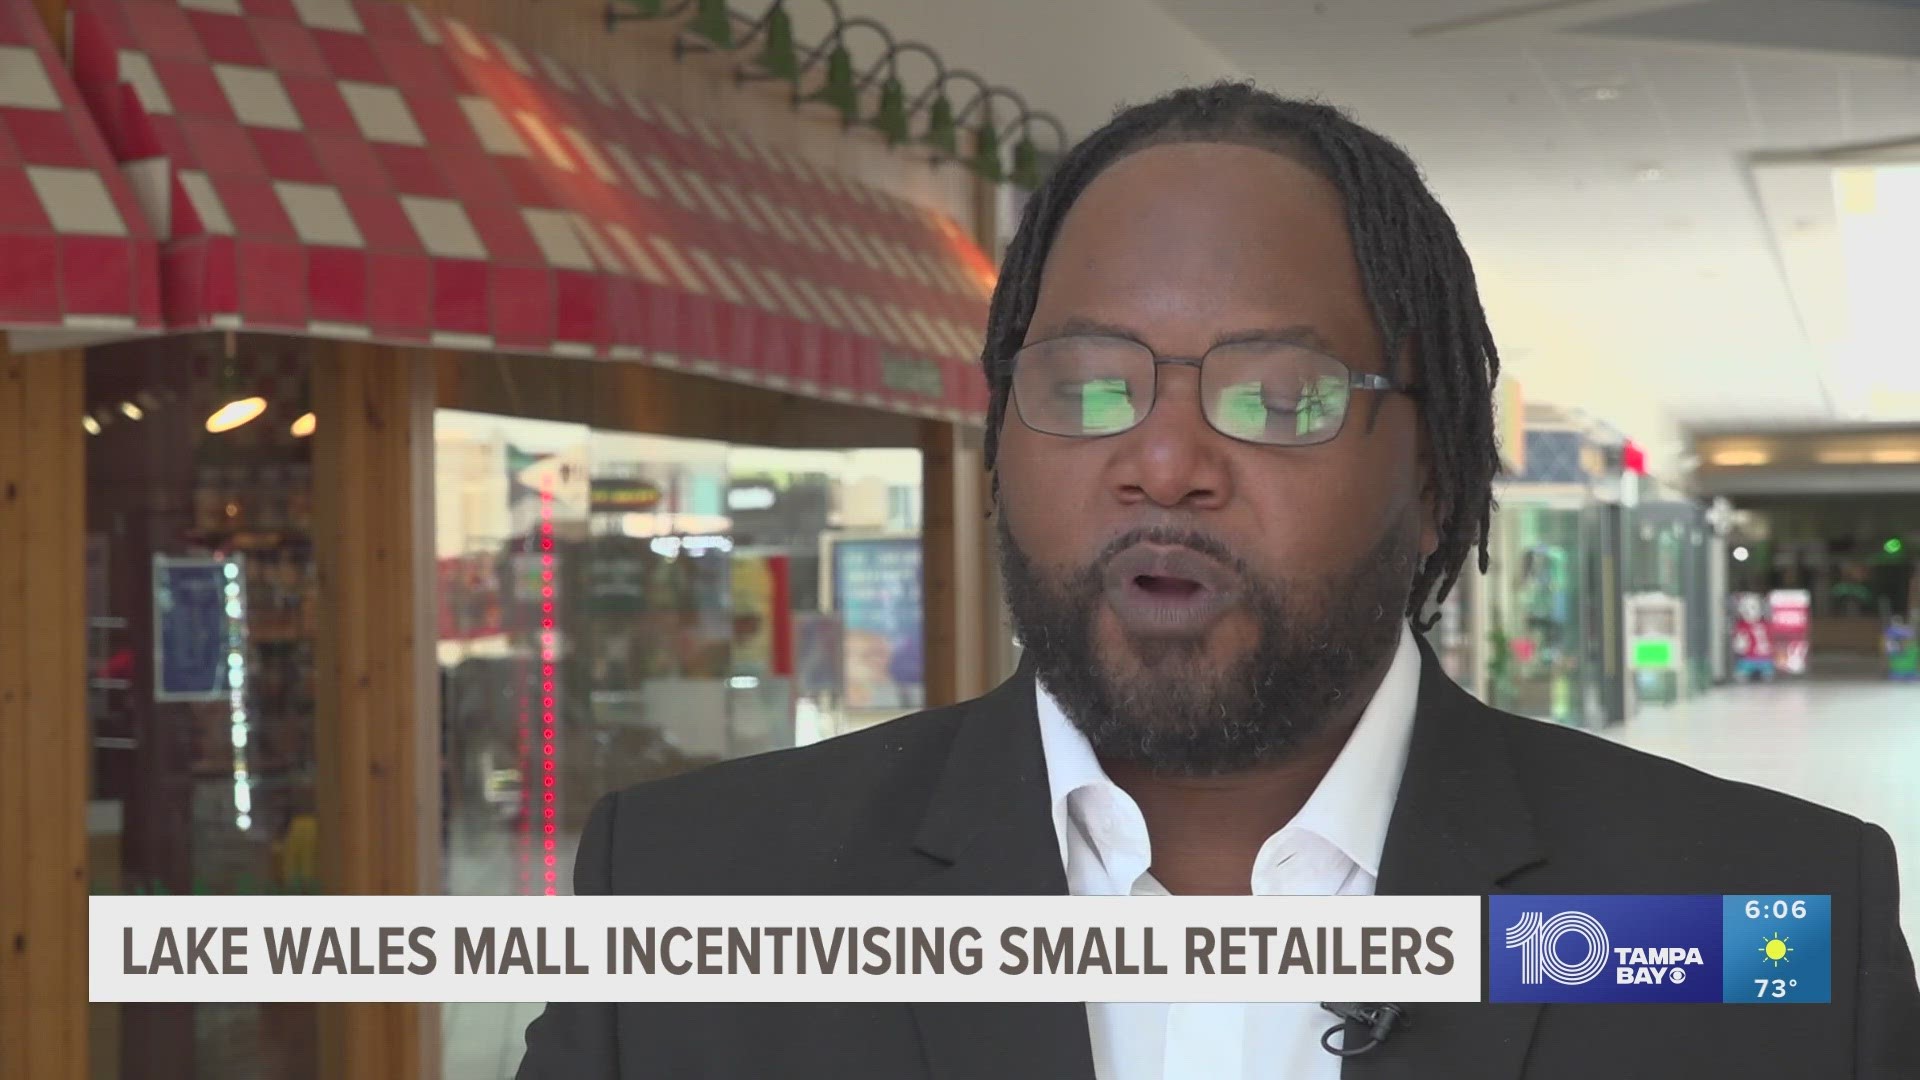 Curtis Gibson, property manager of Eagle Ridge Mall in Lake Wales, added roughly 20 small businesses to the mall.